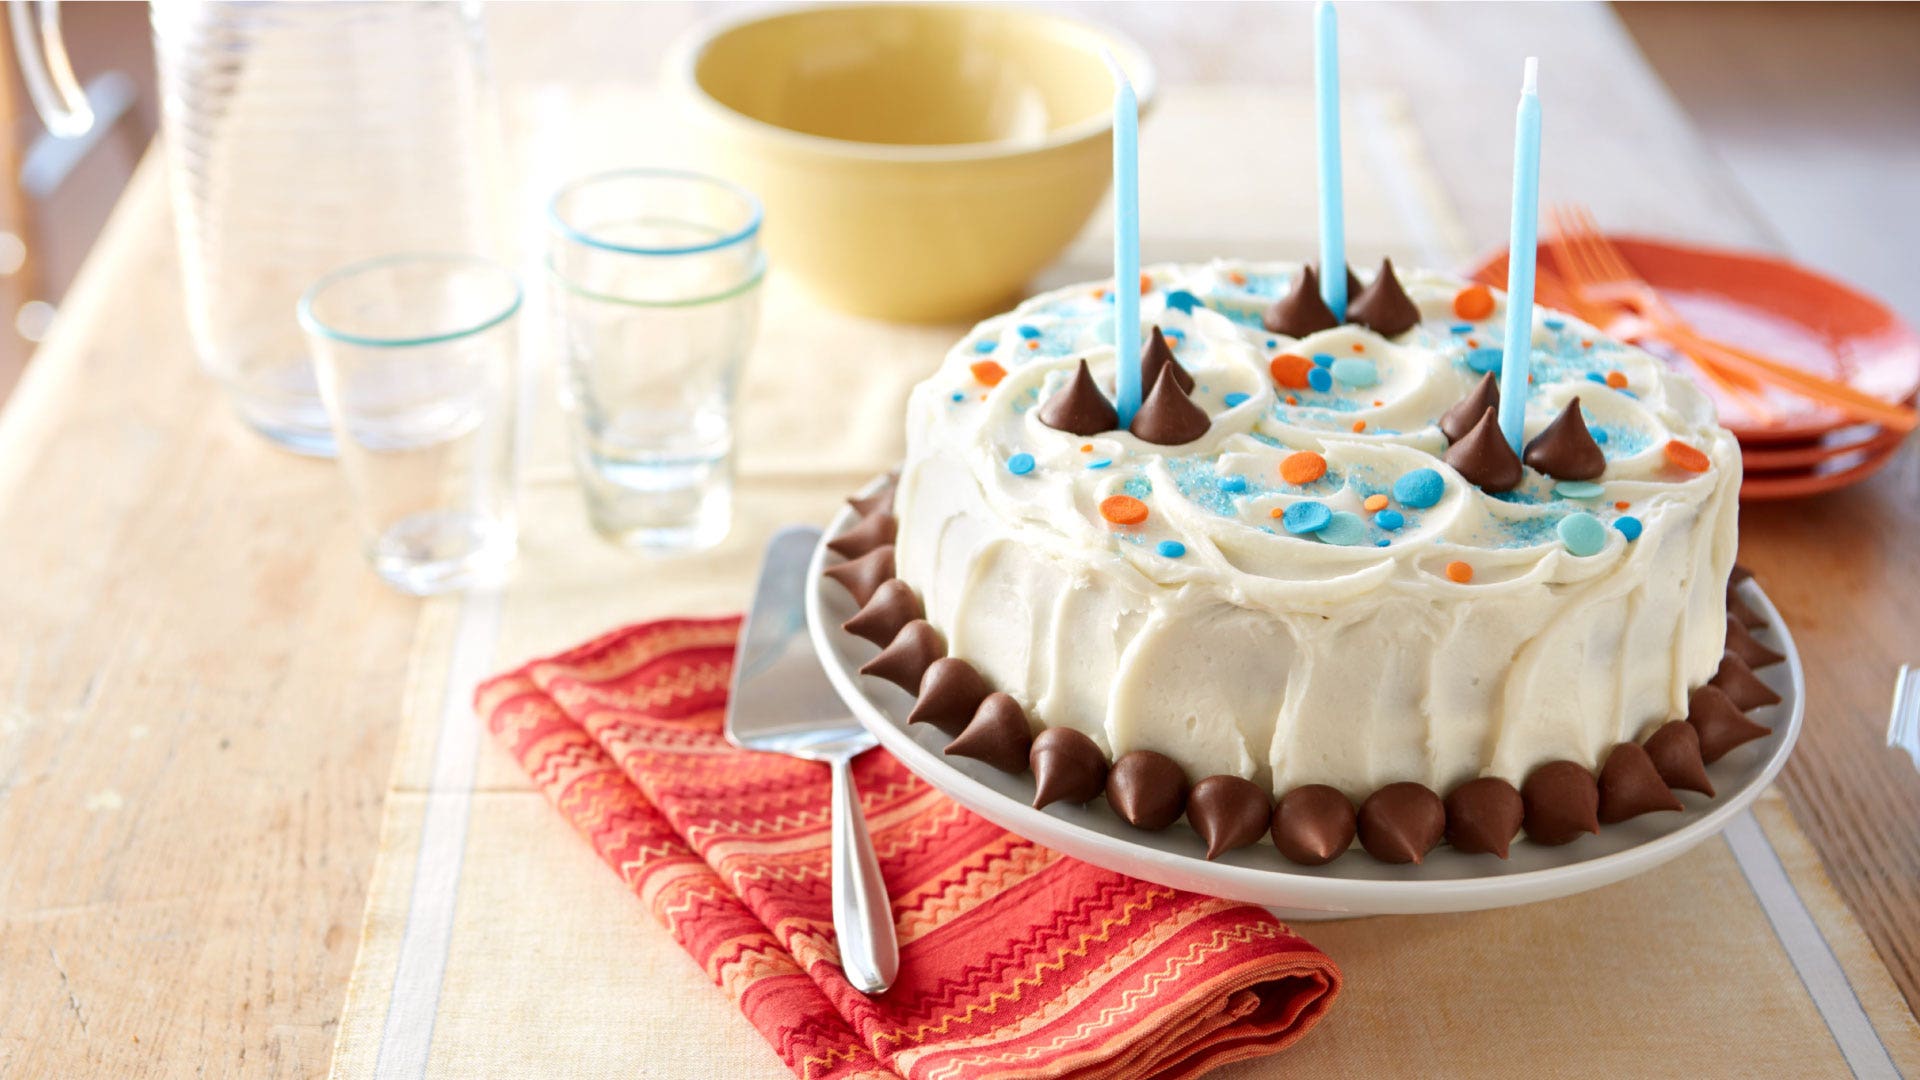 40 Birthday Cake Recipes - The Cooking Foodie